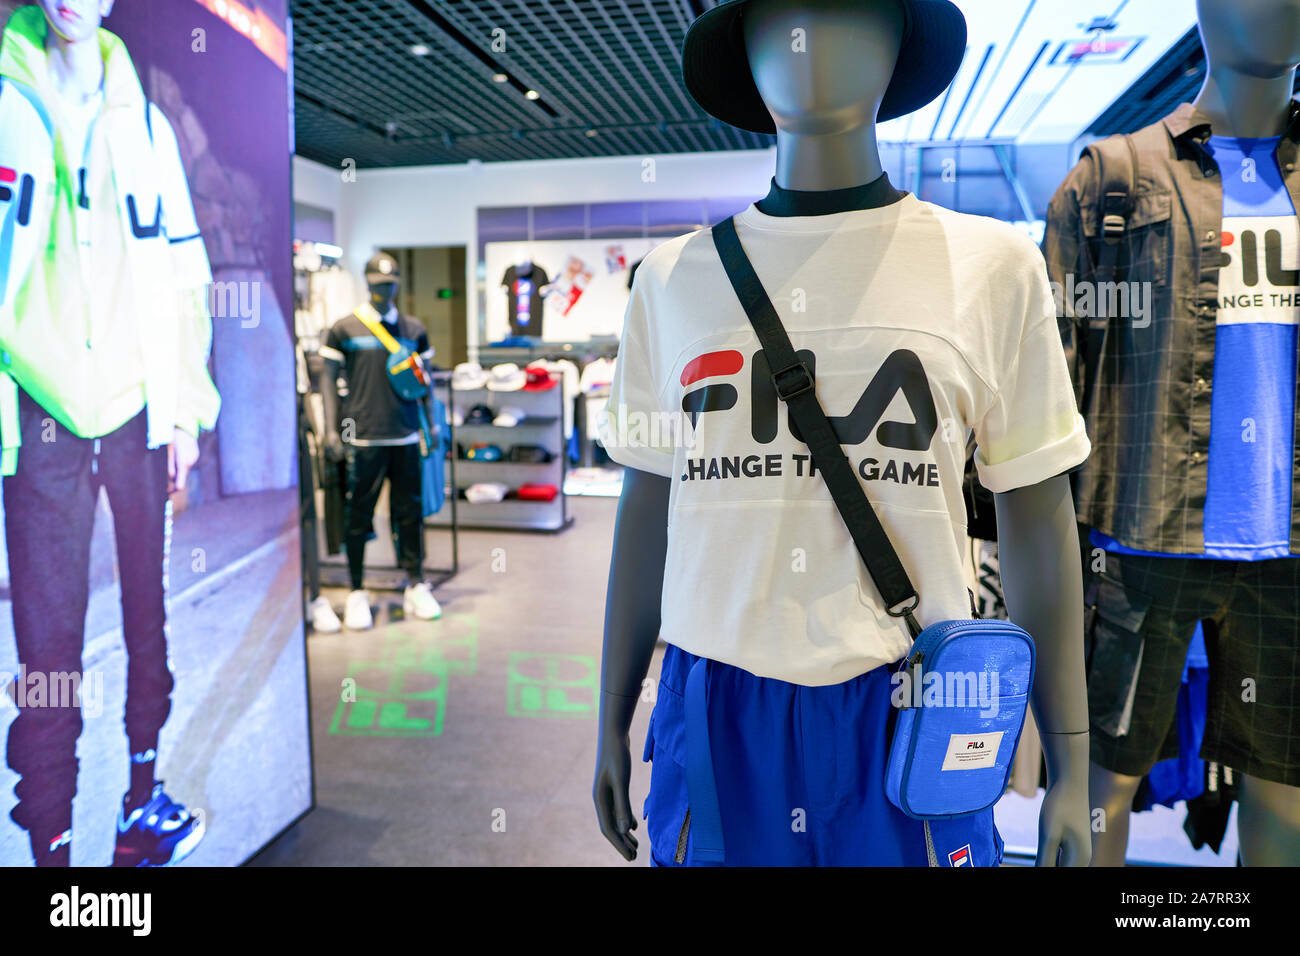 SHENZHEN, CHINA - CIRCA APRIL, 2019: clothes on display Fila store in Shenzhen. Fila is an Italian sporting brand and Stock Photo - Alamy